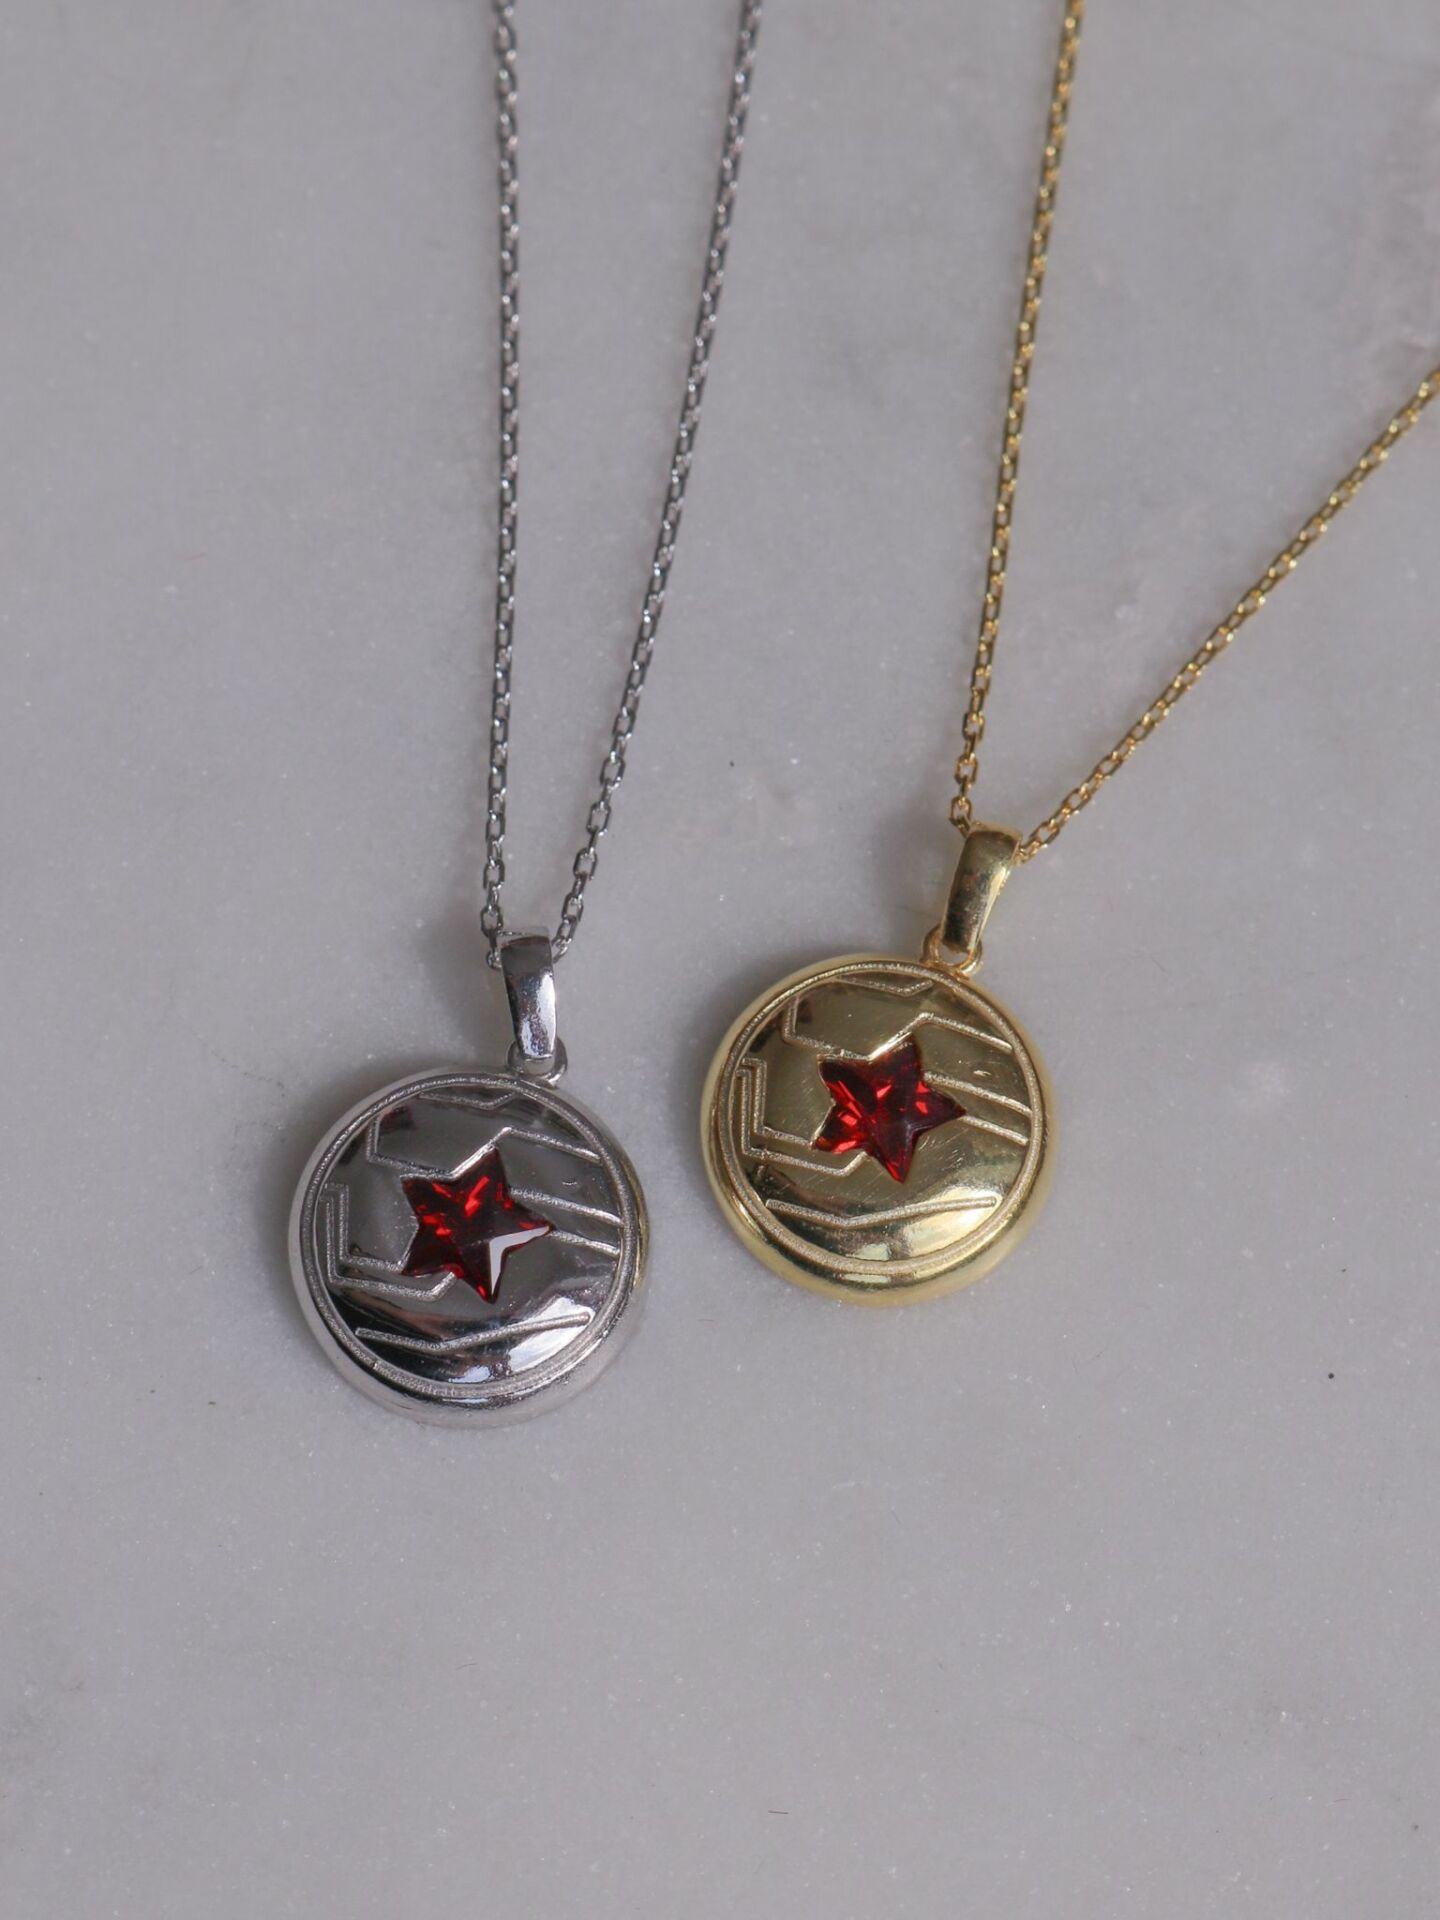 Buy Pendant Necklace / Captain America Design / Stainless Steel Dog Tag  Chain / Black Gold Silver Color / Steve Rogers Freedom Star Shield Online  in India - Etsy